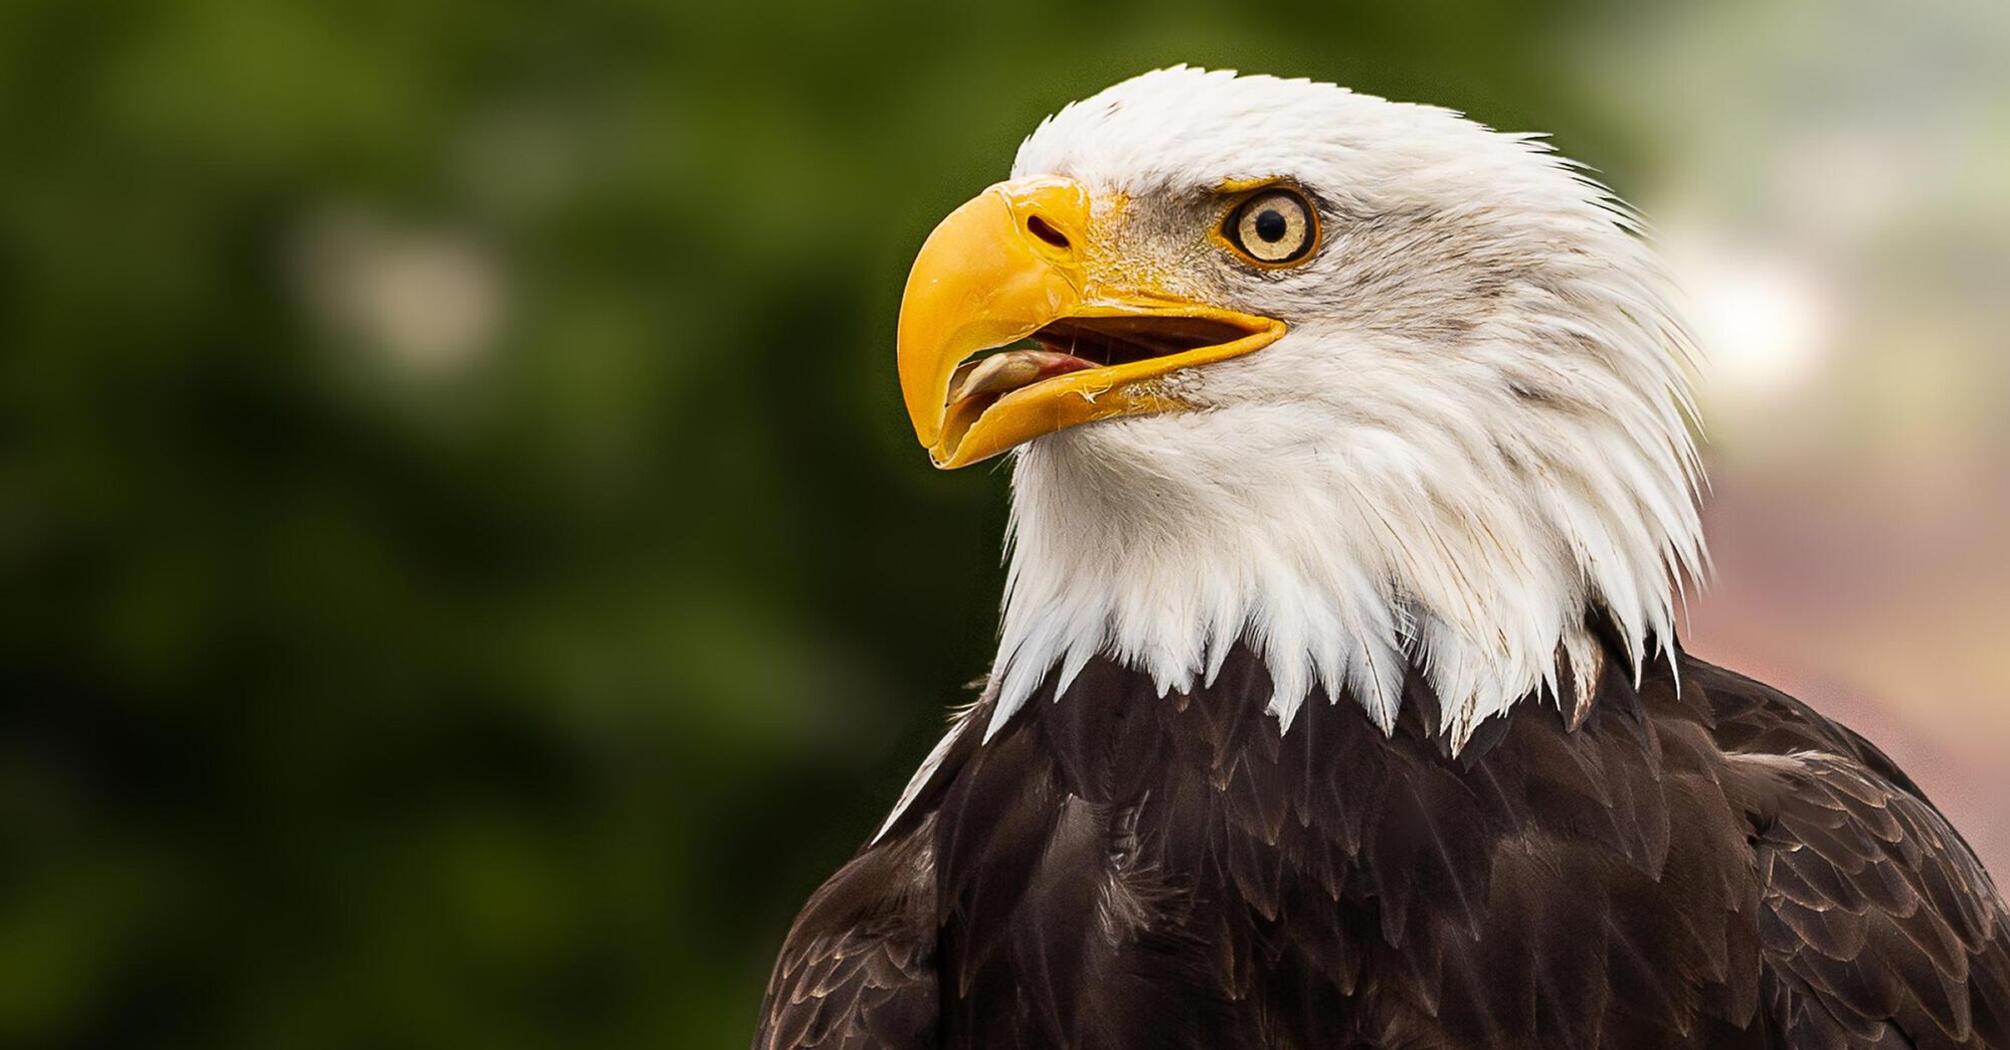 National symbol of the USA: where you can see a real bald eagle